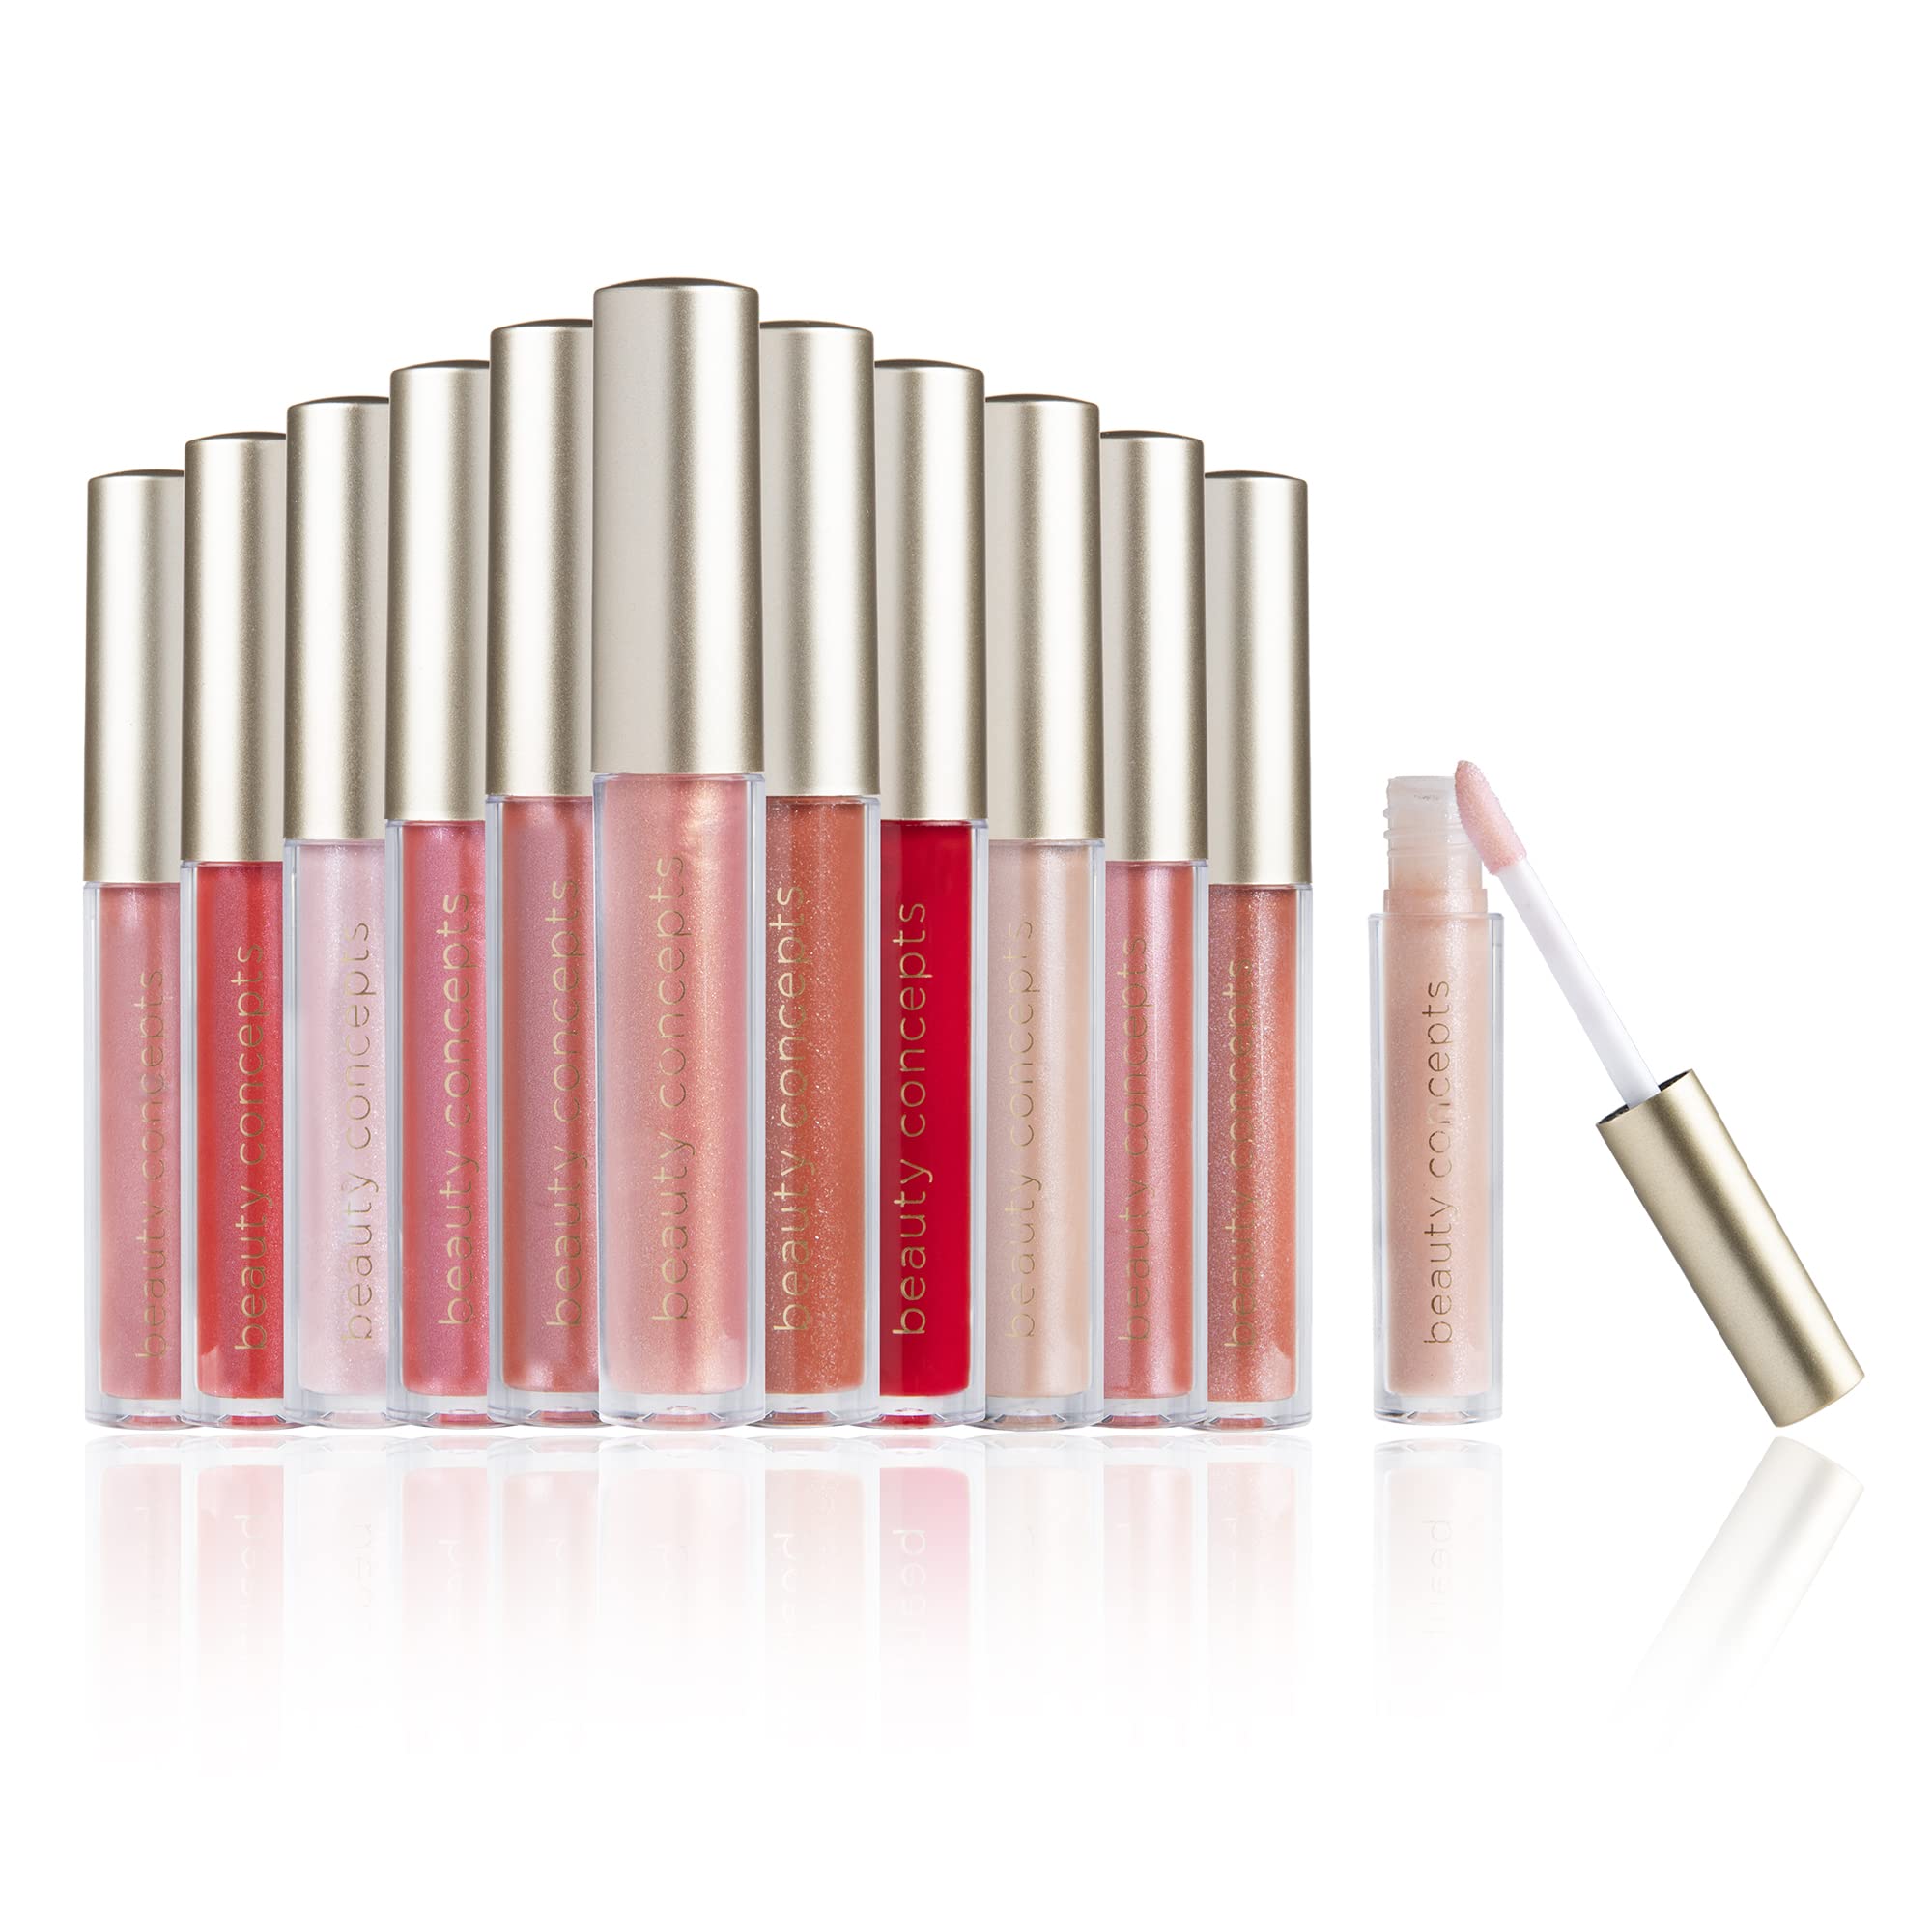 Beauty Concepts Lip Gloss Collection- 12 Piece Lip Gloss Set in